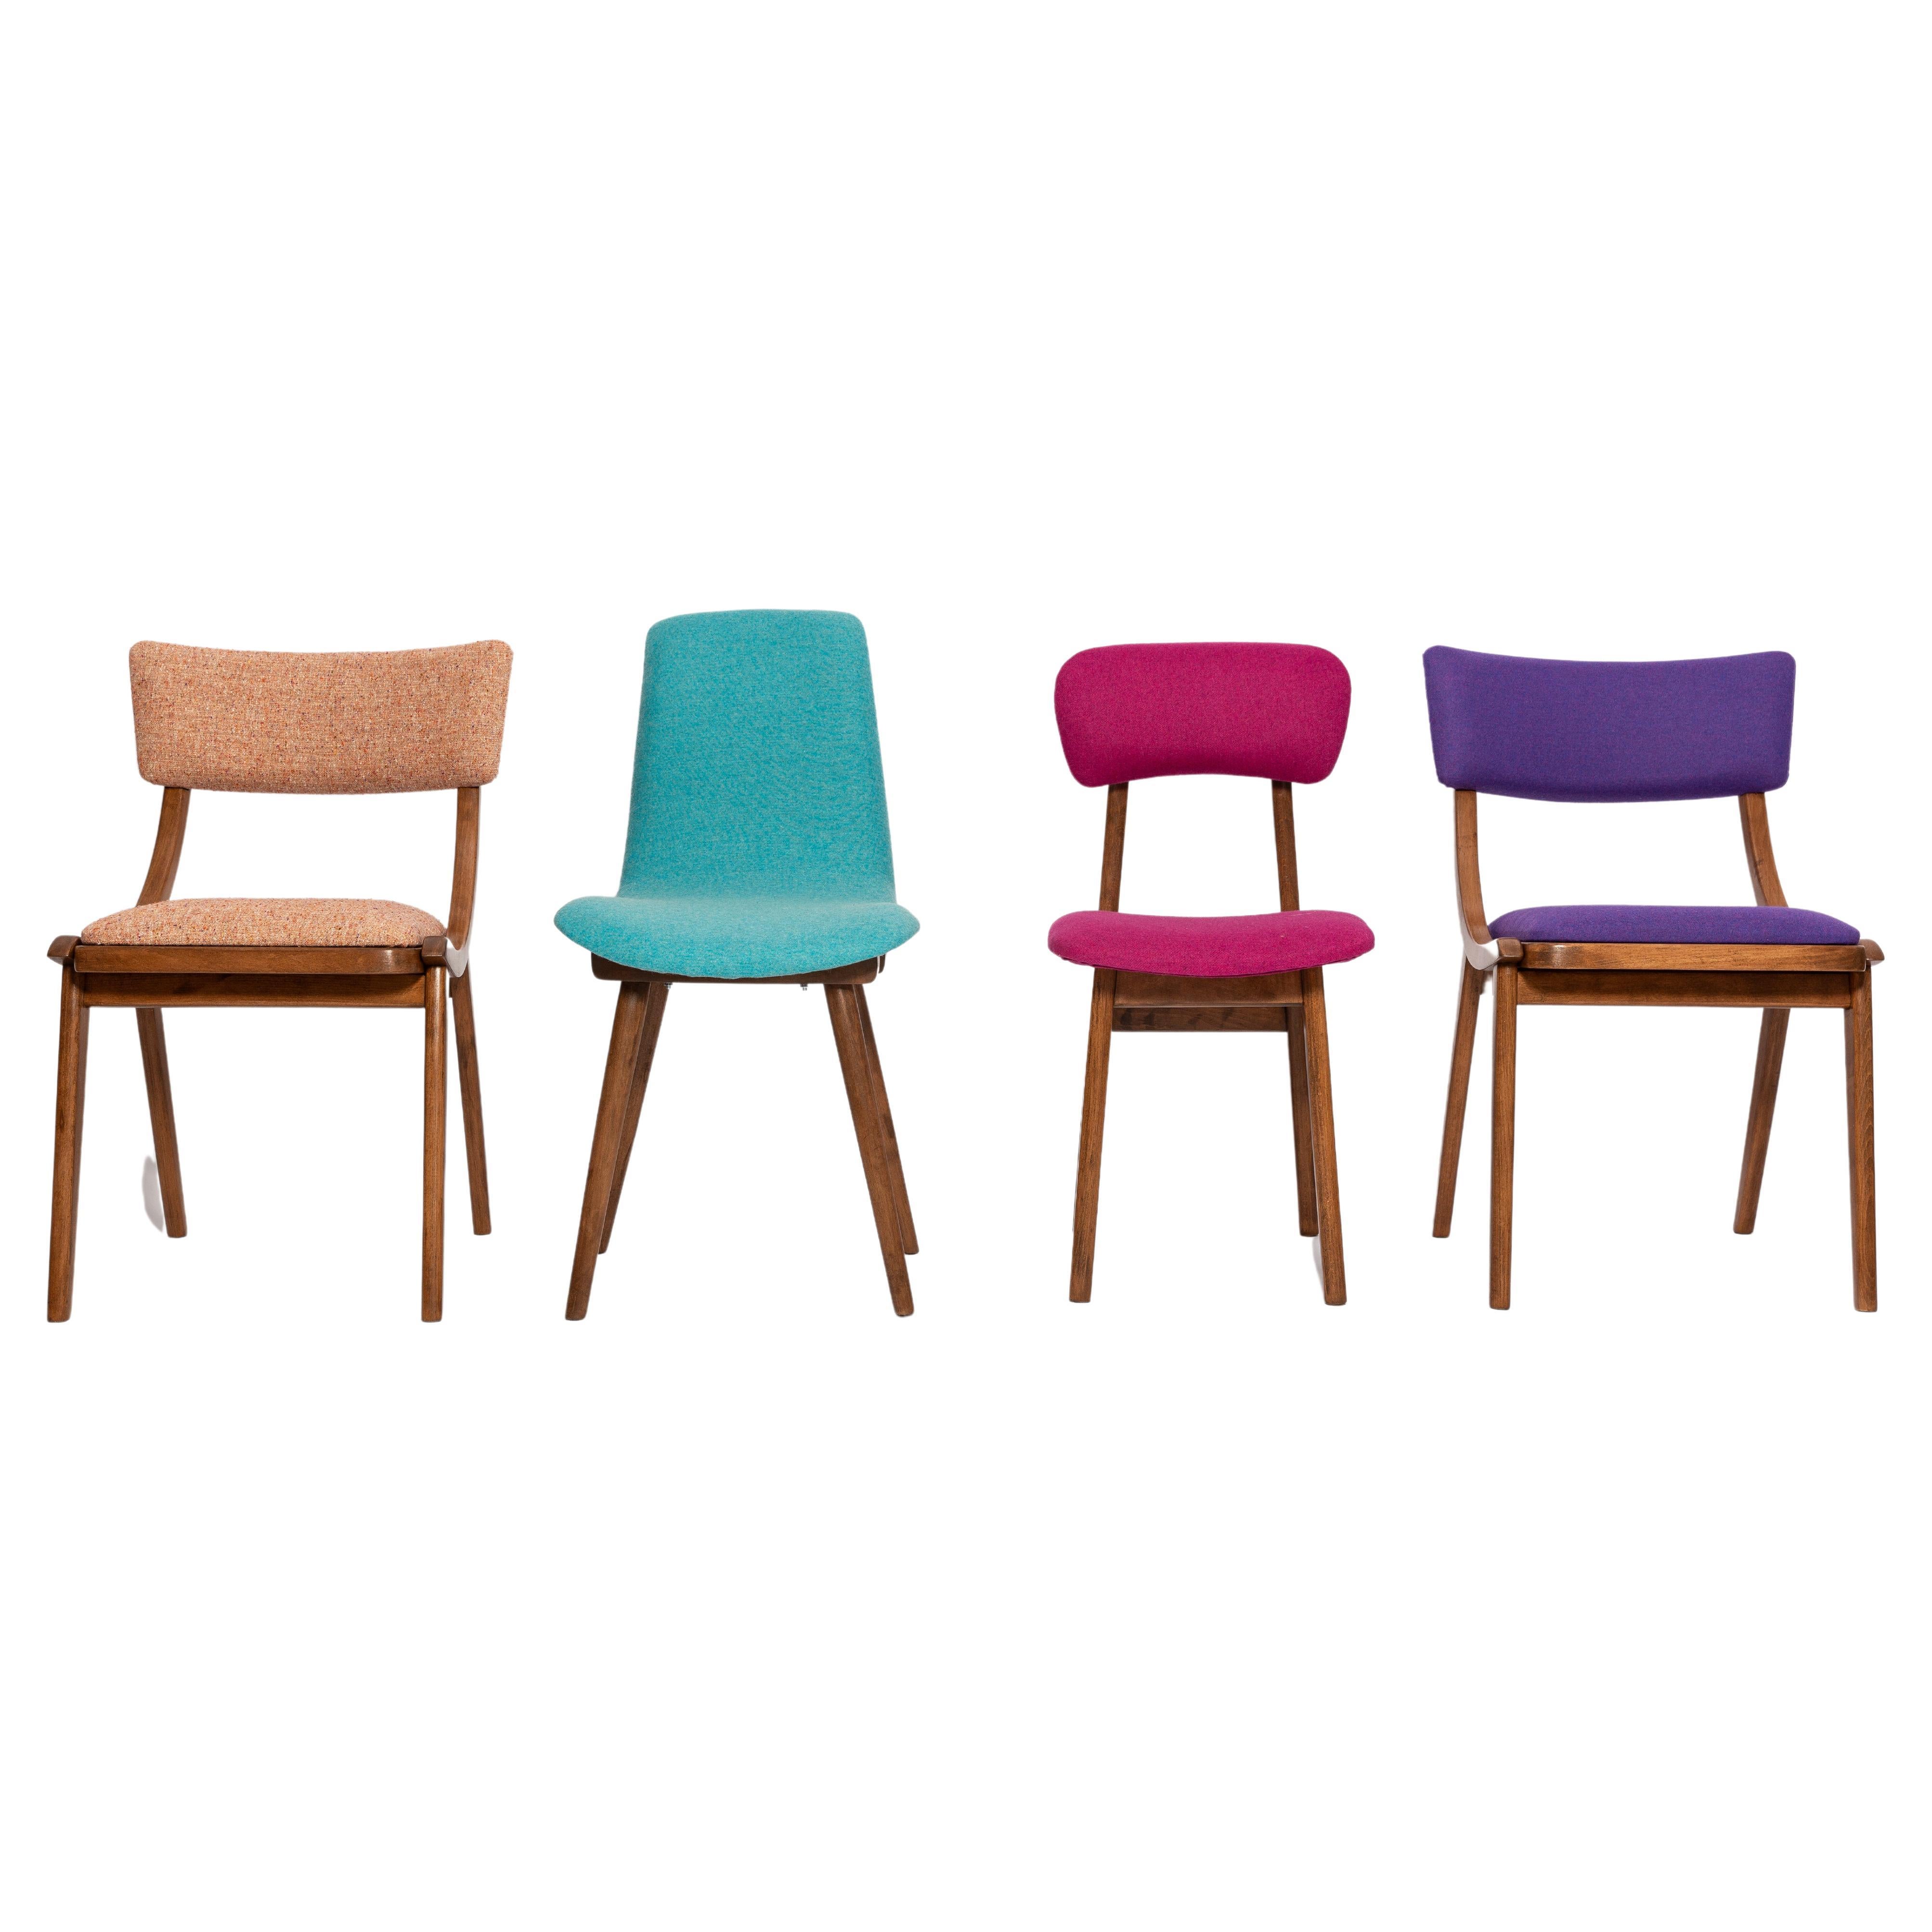 Set of Four Mid Century Wool Chairs, Rajmund Halas, Europe, 1960s For Sale